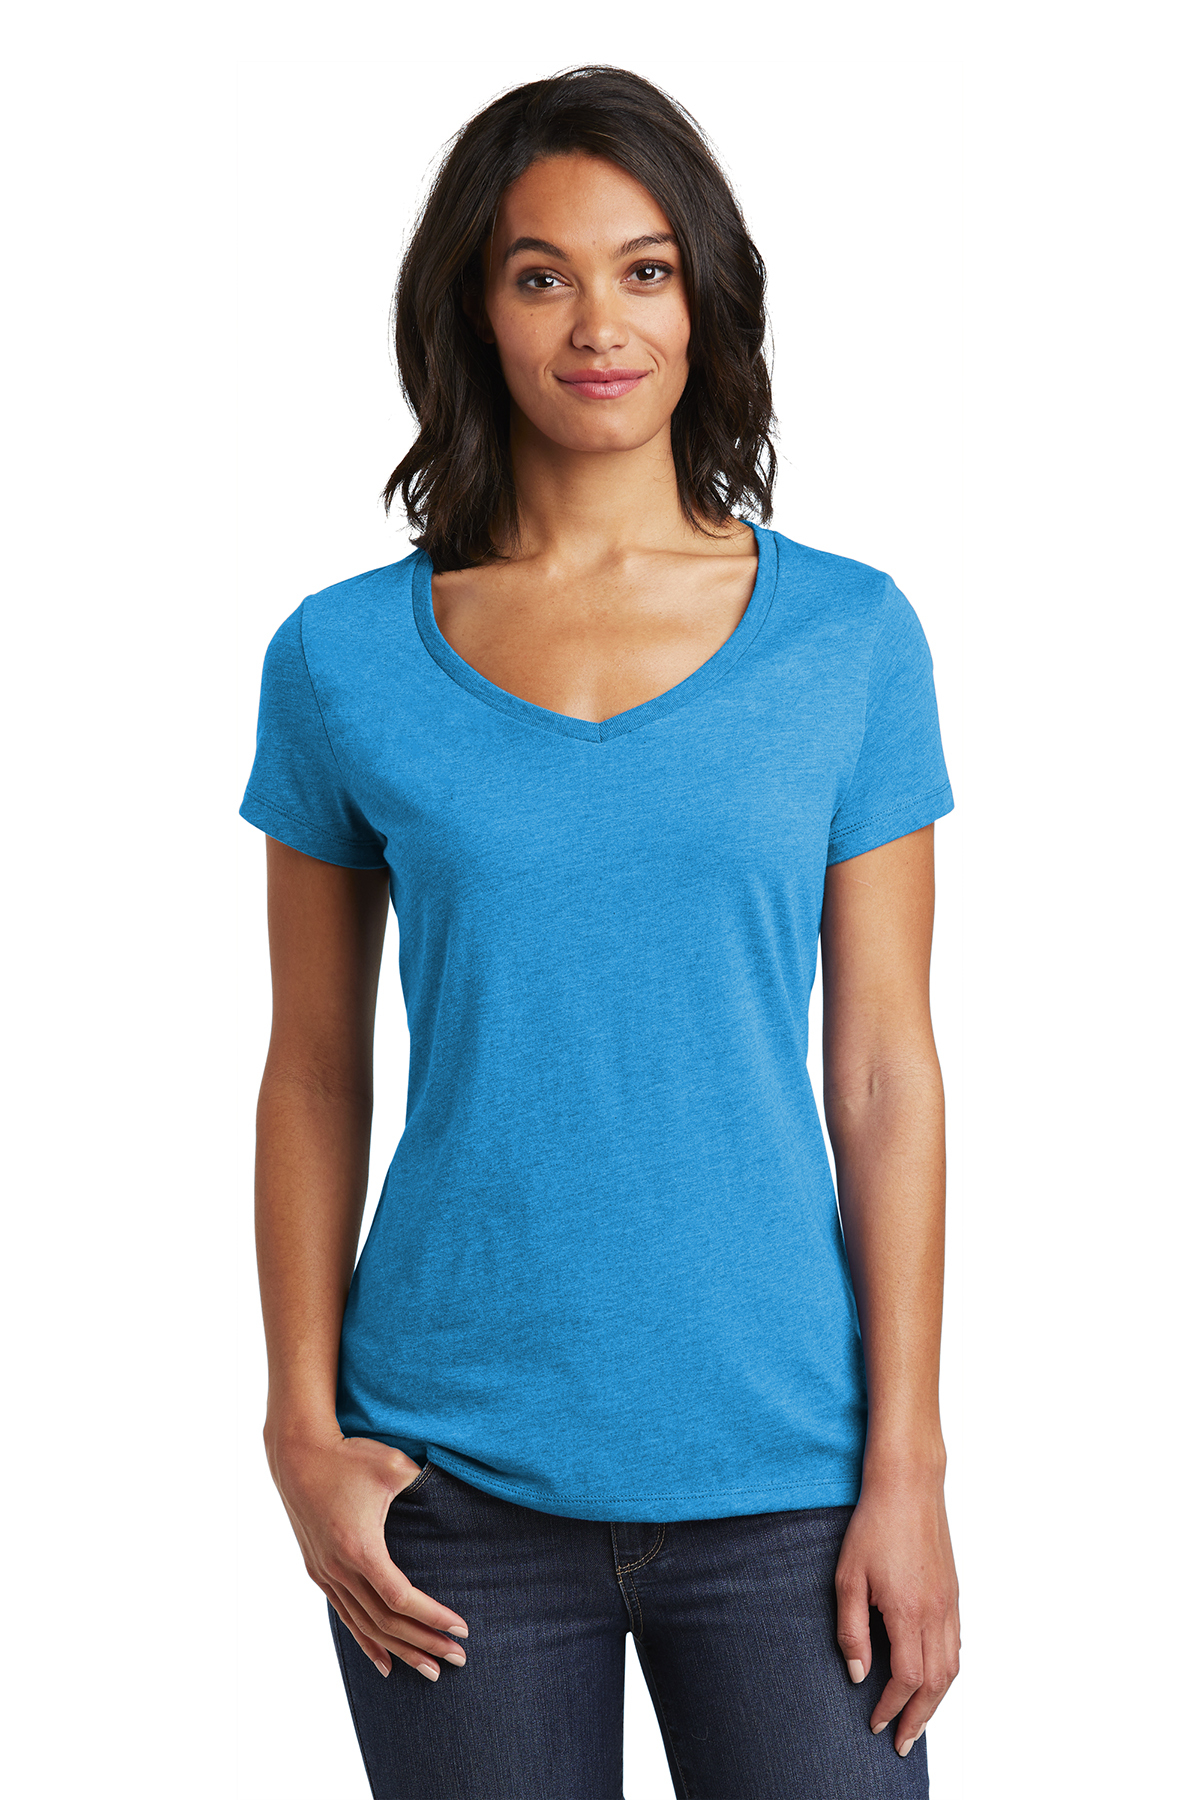 District DT6503 - Women's Very Important Tee V-Neck $6.45 - T-Shirts